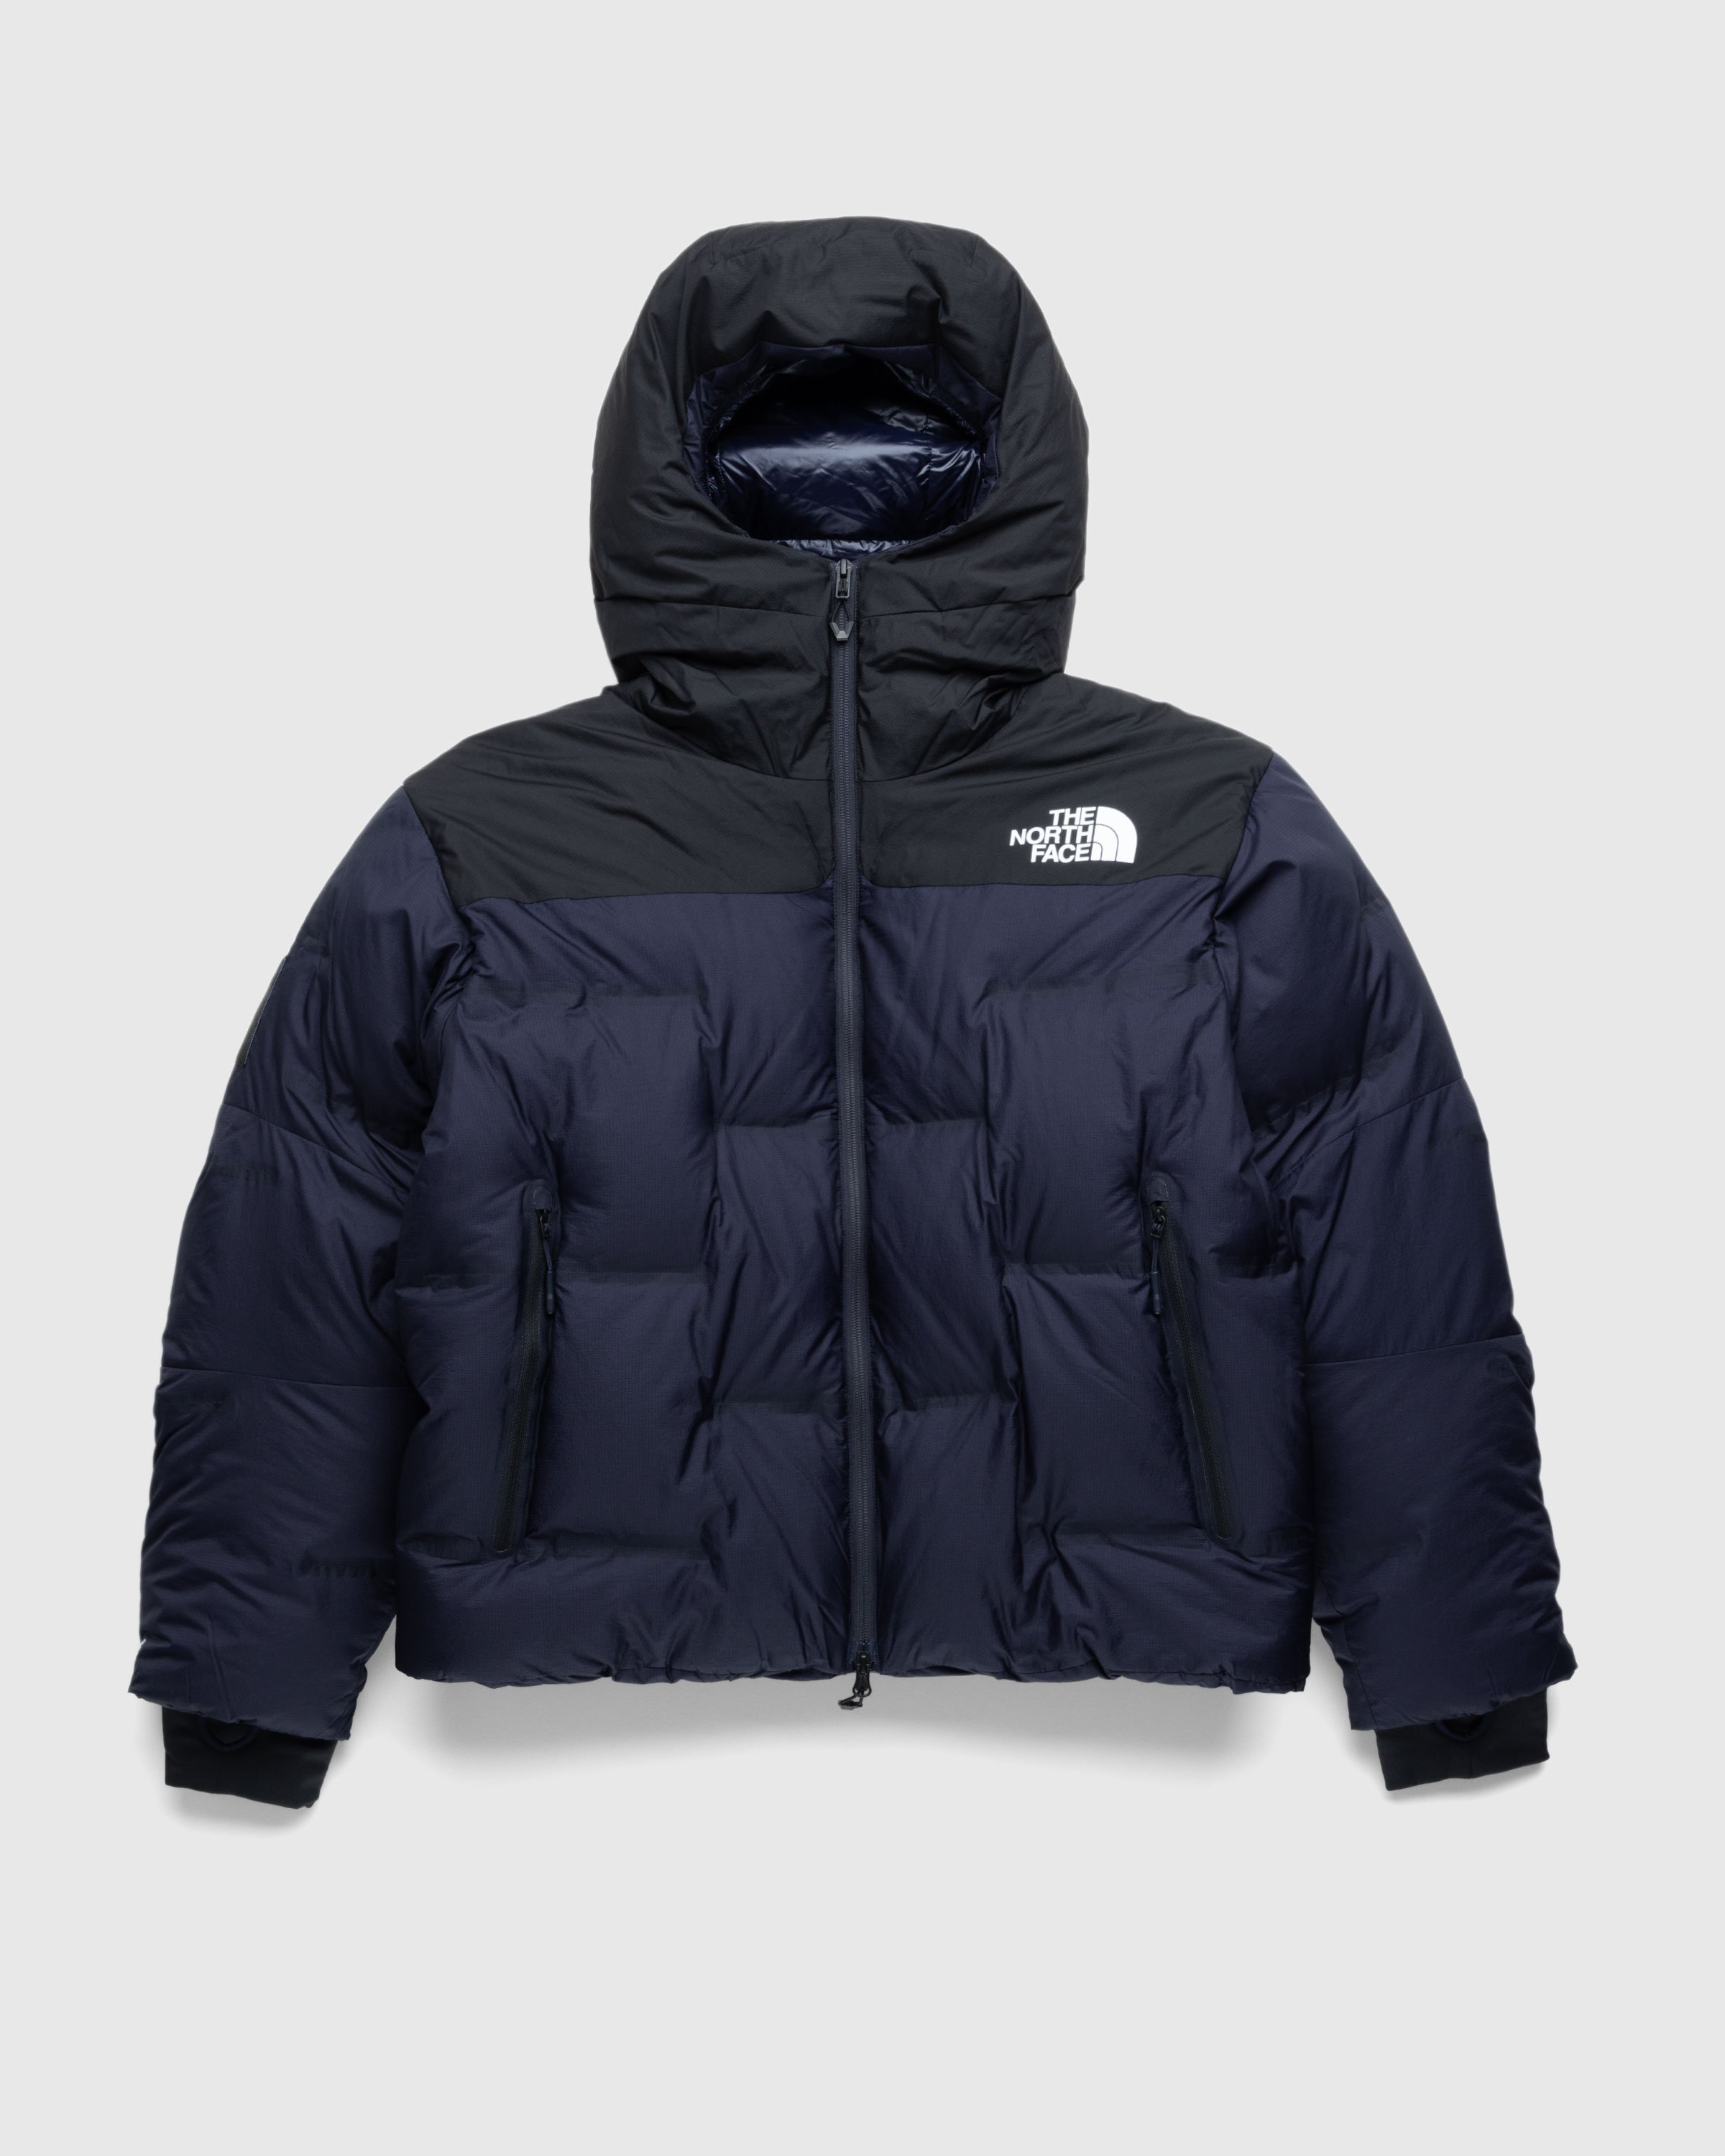 The North Face x UNDERCOVER - Soukuu Cloud Down Nupste Parka Black/Navy - Clothing - Multi - Image 1